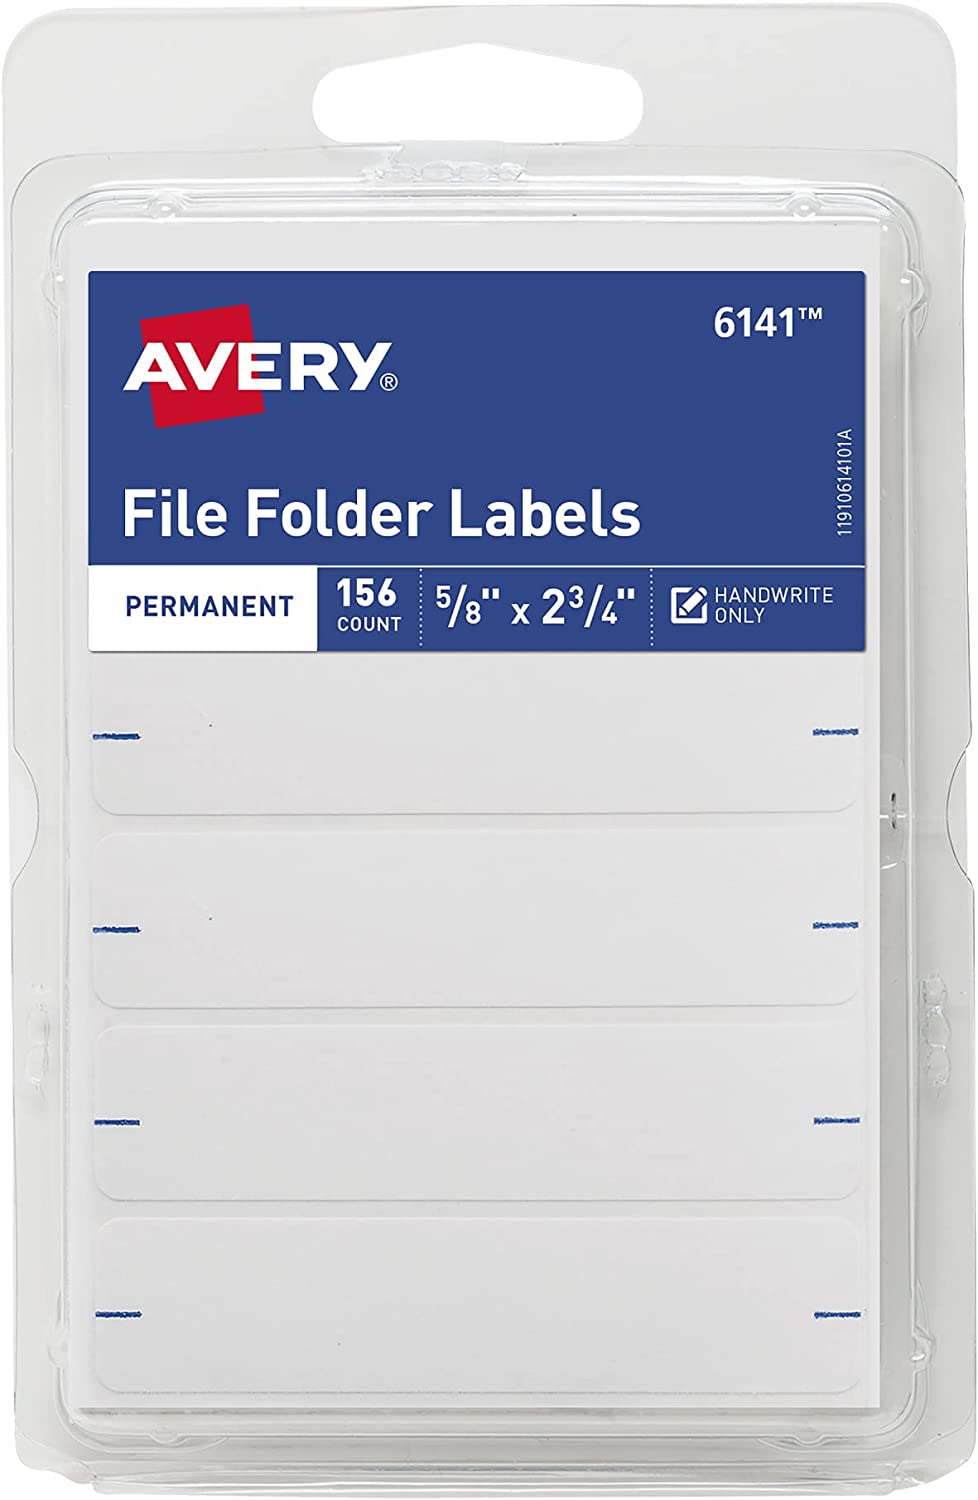 Avery Permanent File Folder Labels 2.75 x 0.625 Inches\ White 156 labels